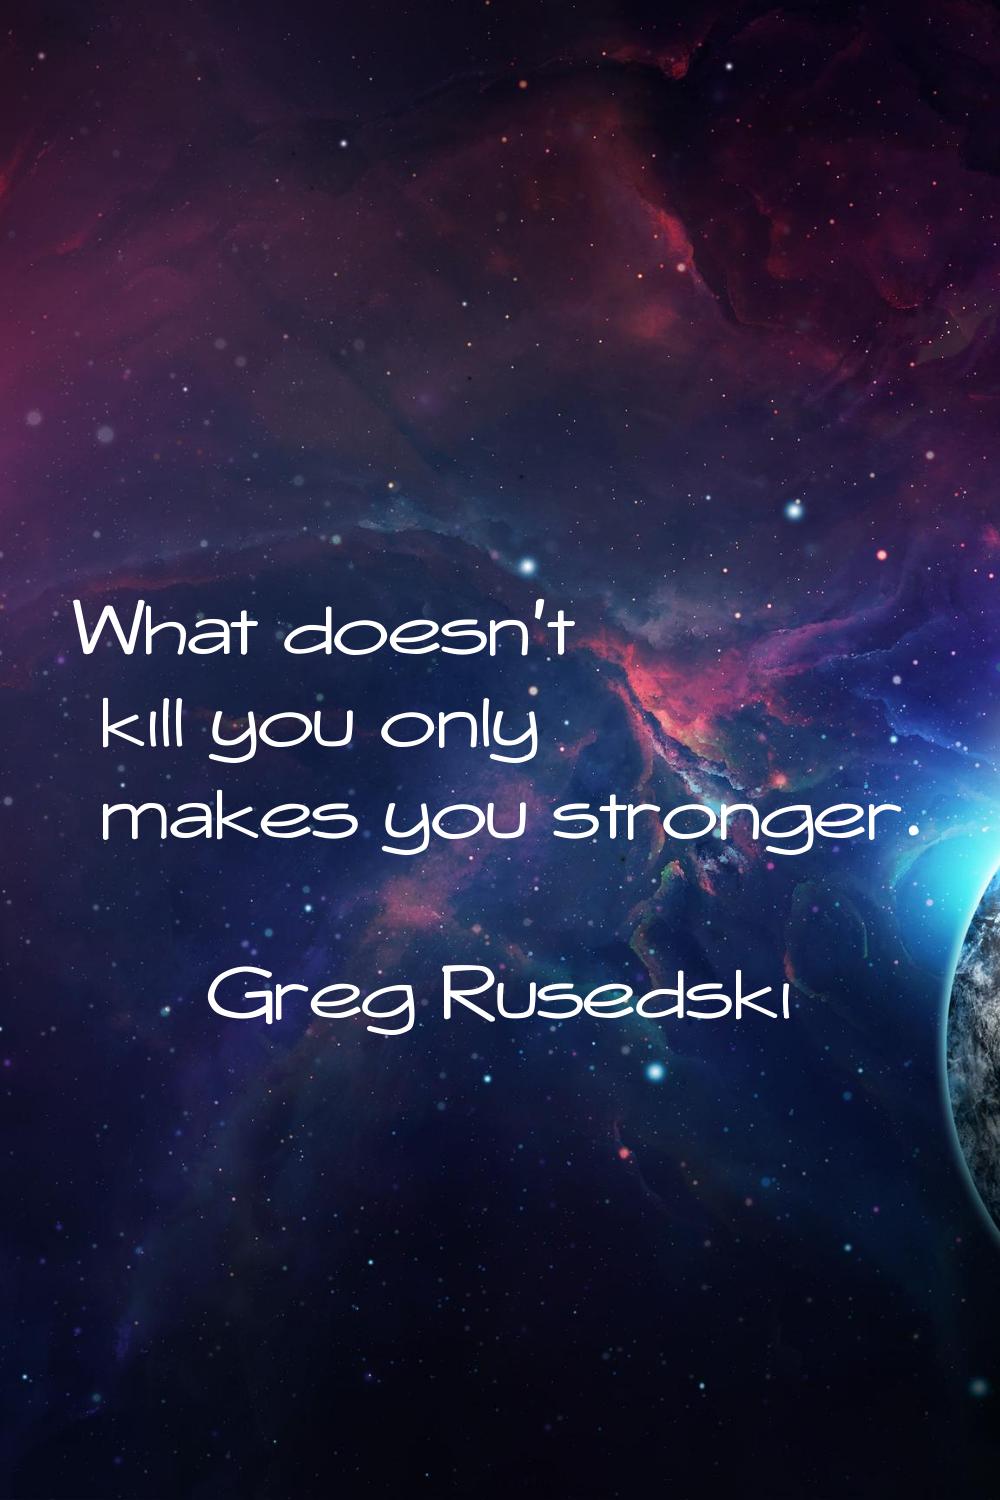 What doesn't kill you only makes you stronger.